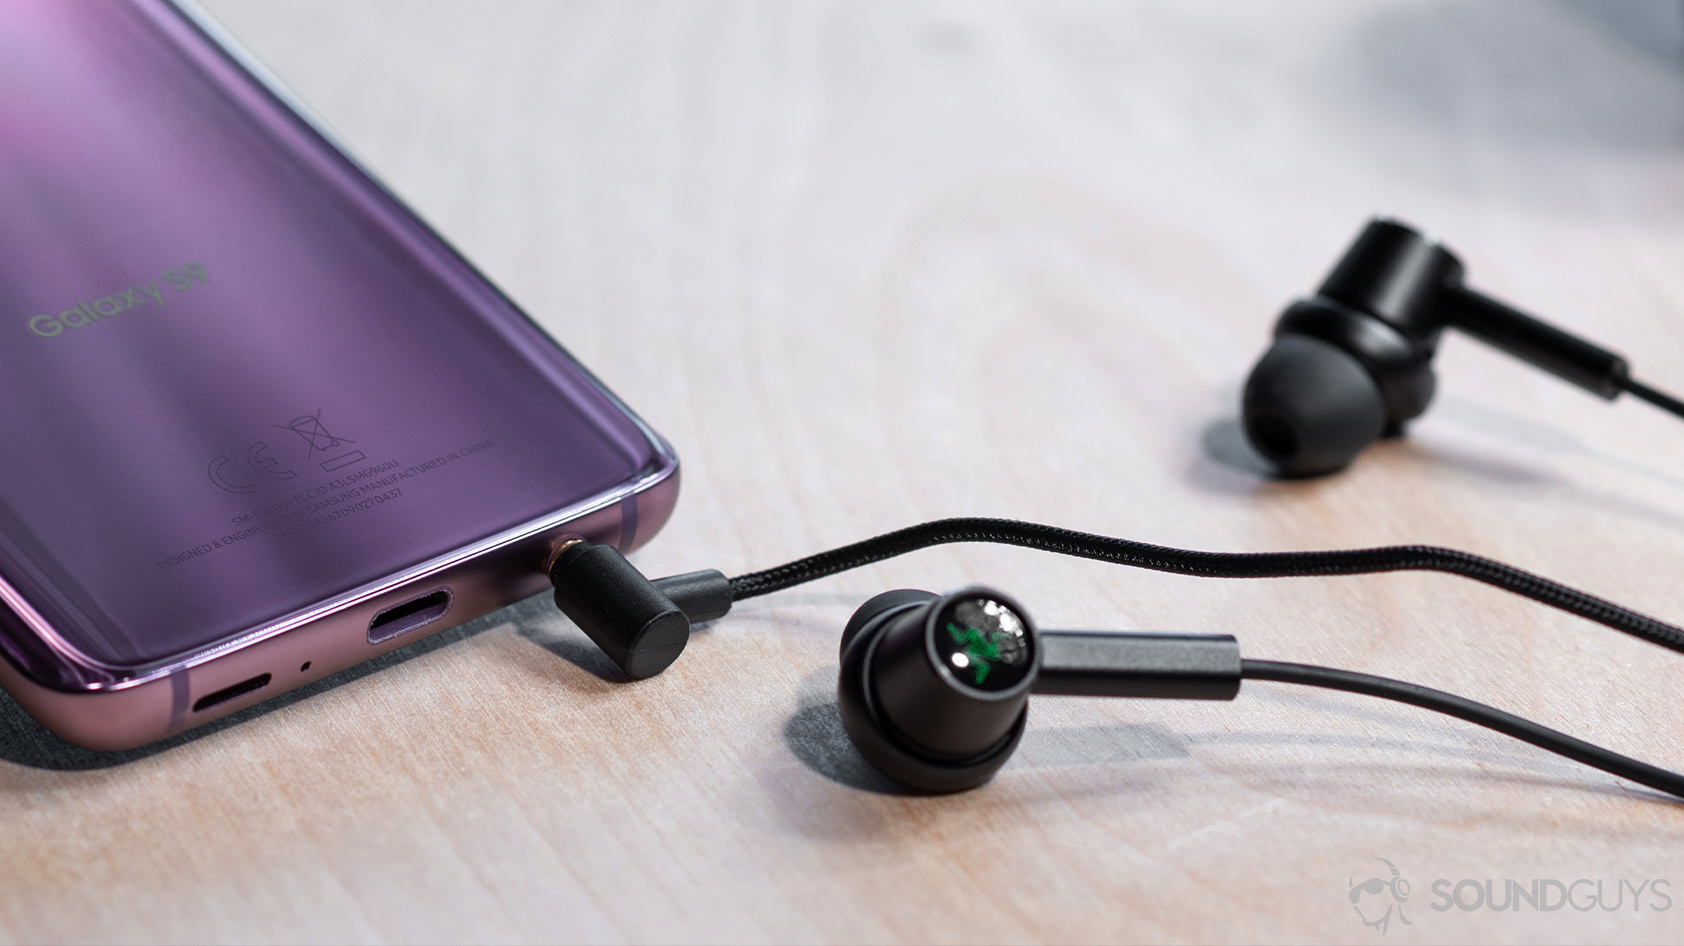 The L-shaped 3.5mm headphone jack inserted into a Samsung Galaxy S9 in Lilac.